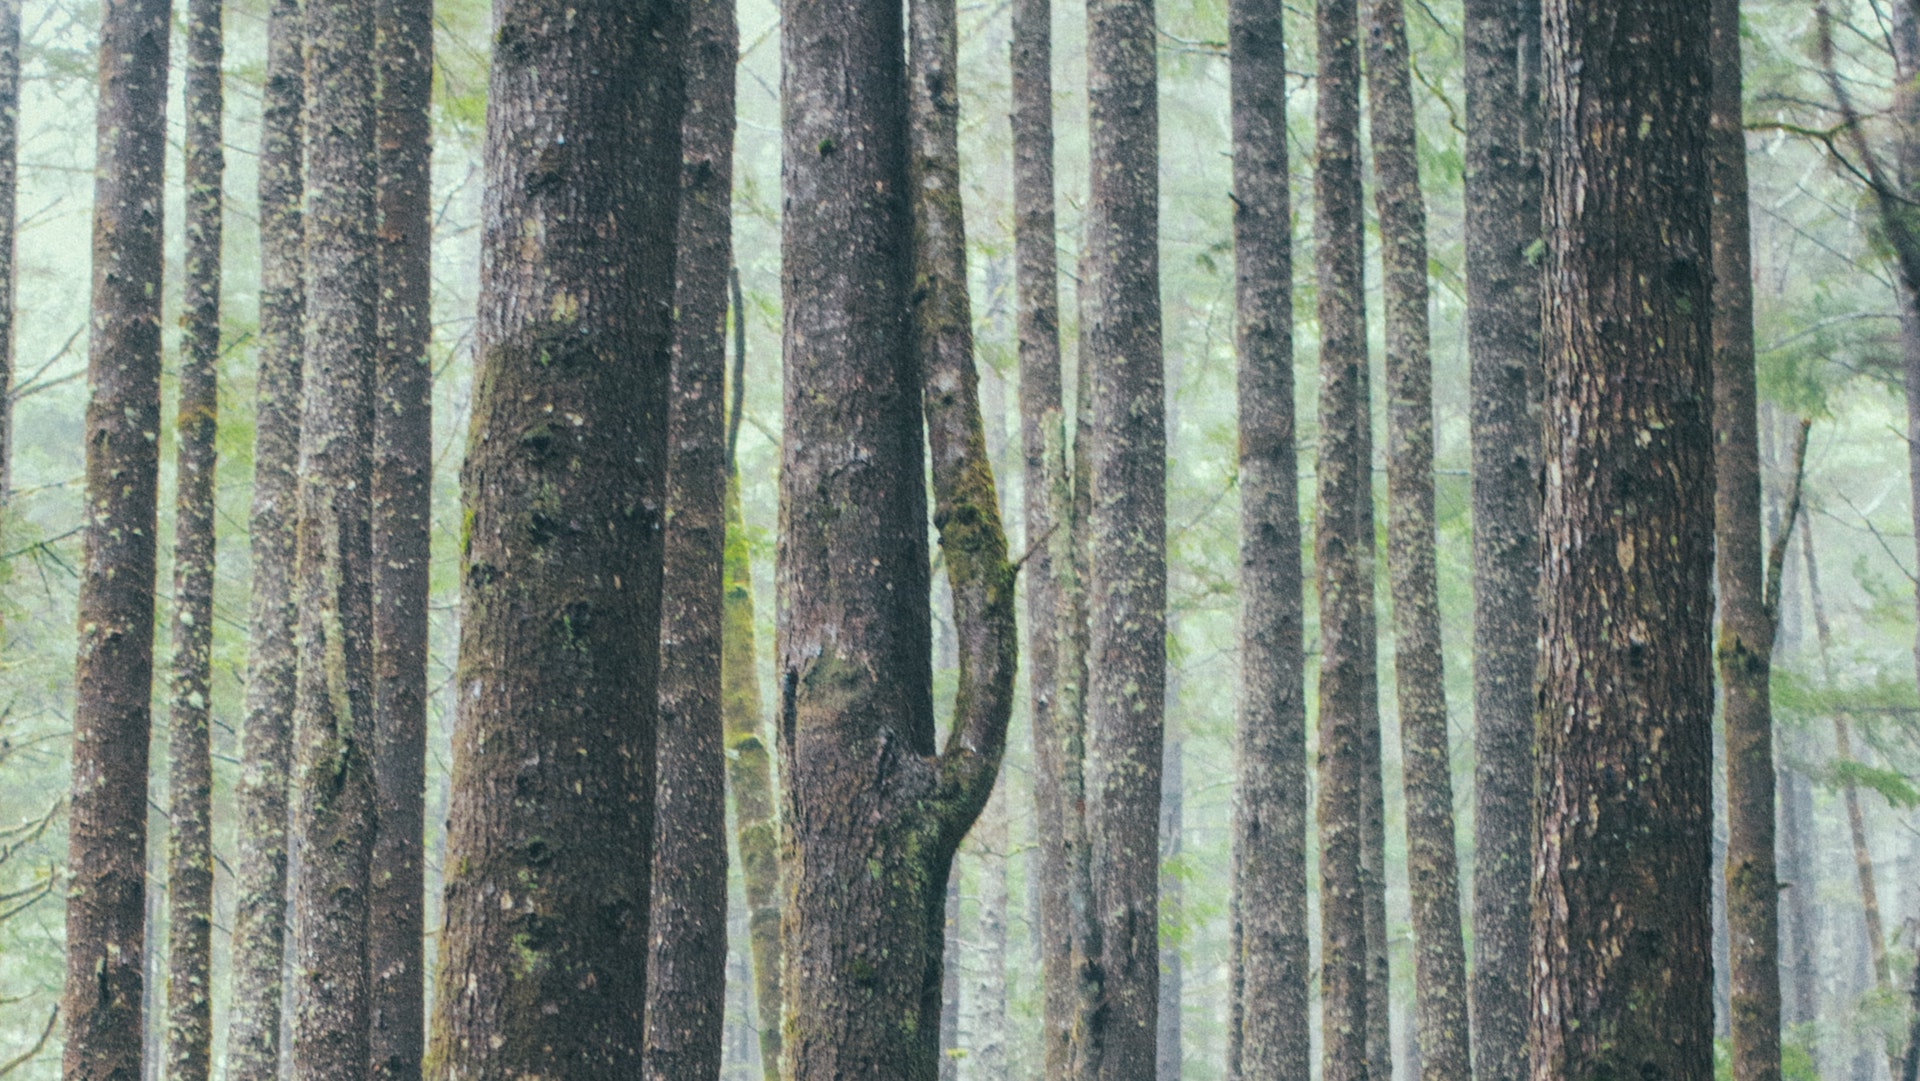 A grove of trees at Ecola State Park in Clatsop County, Oregon.